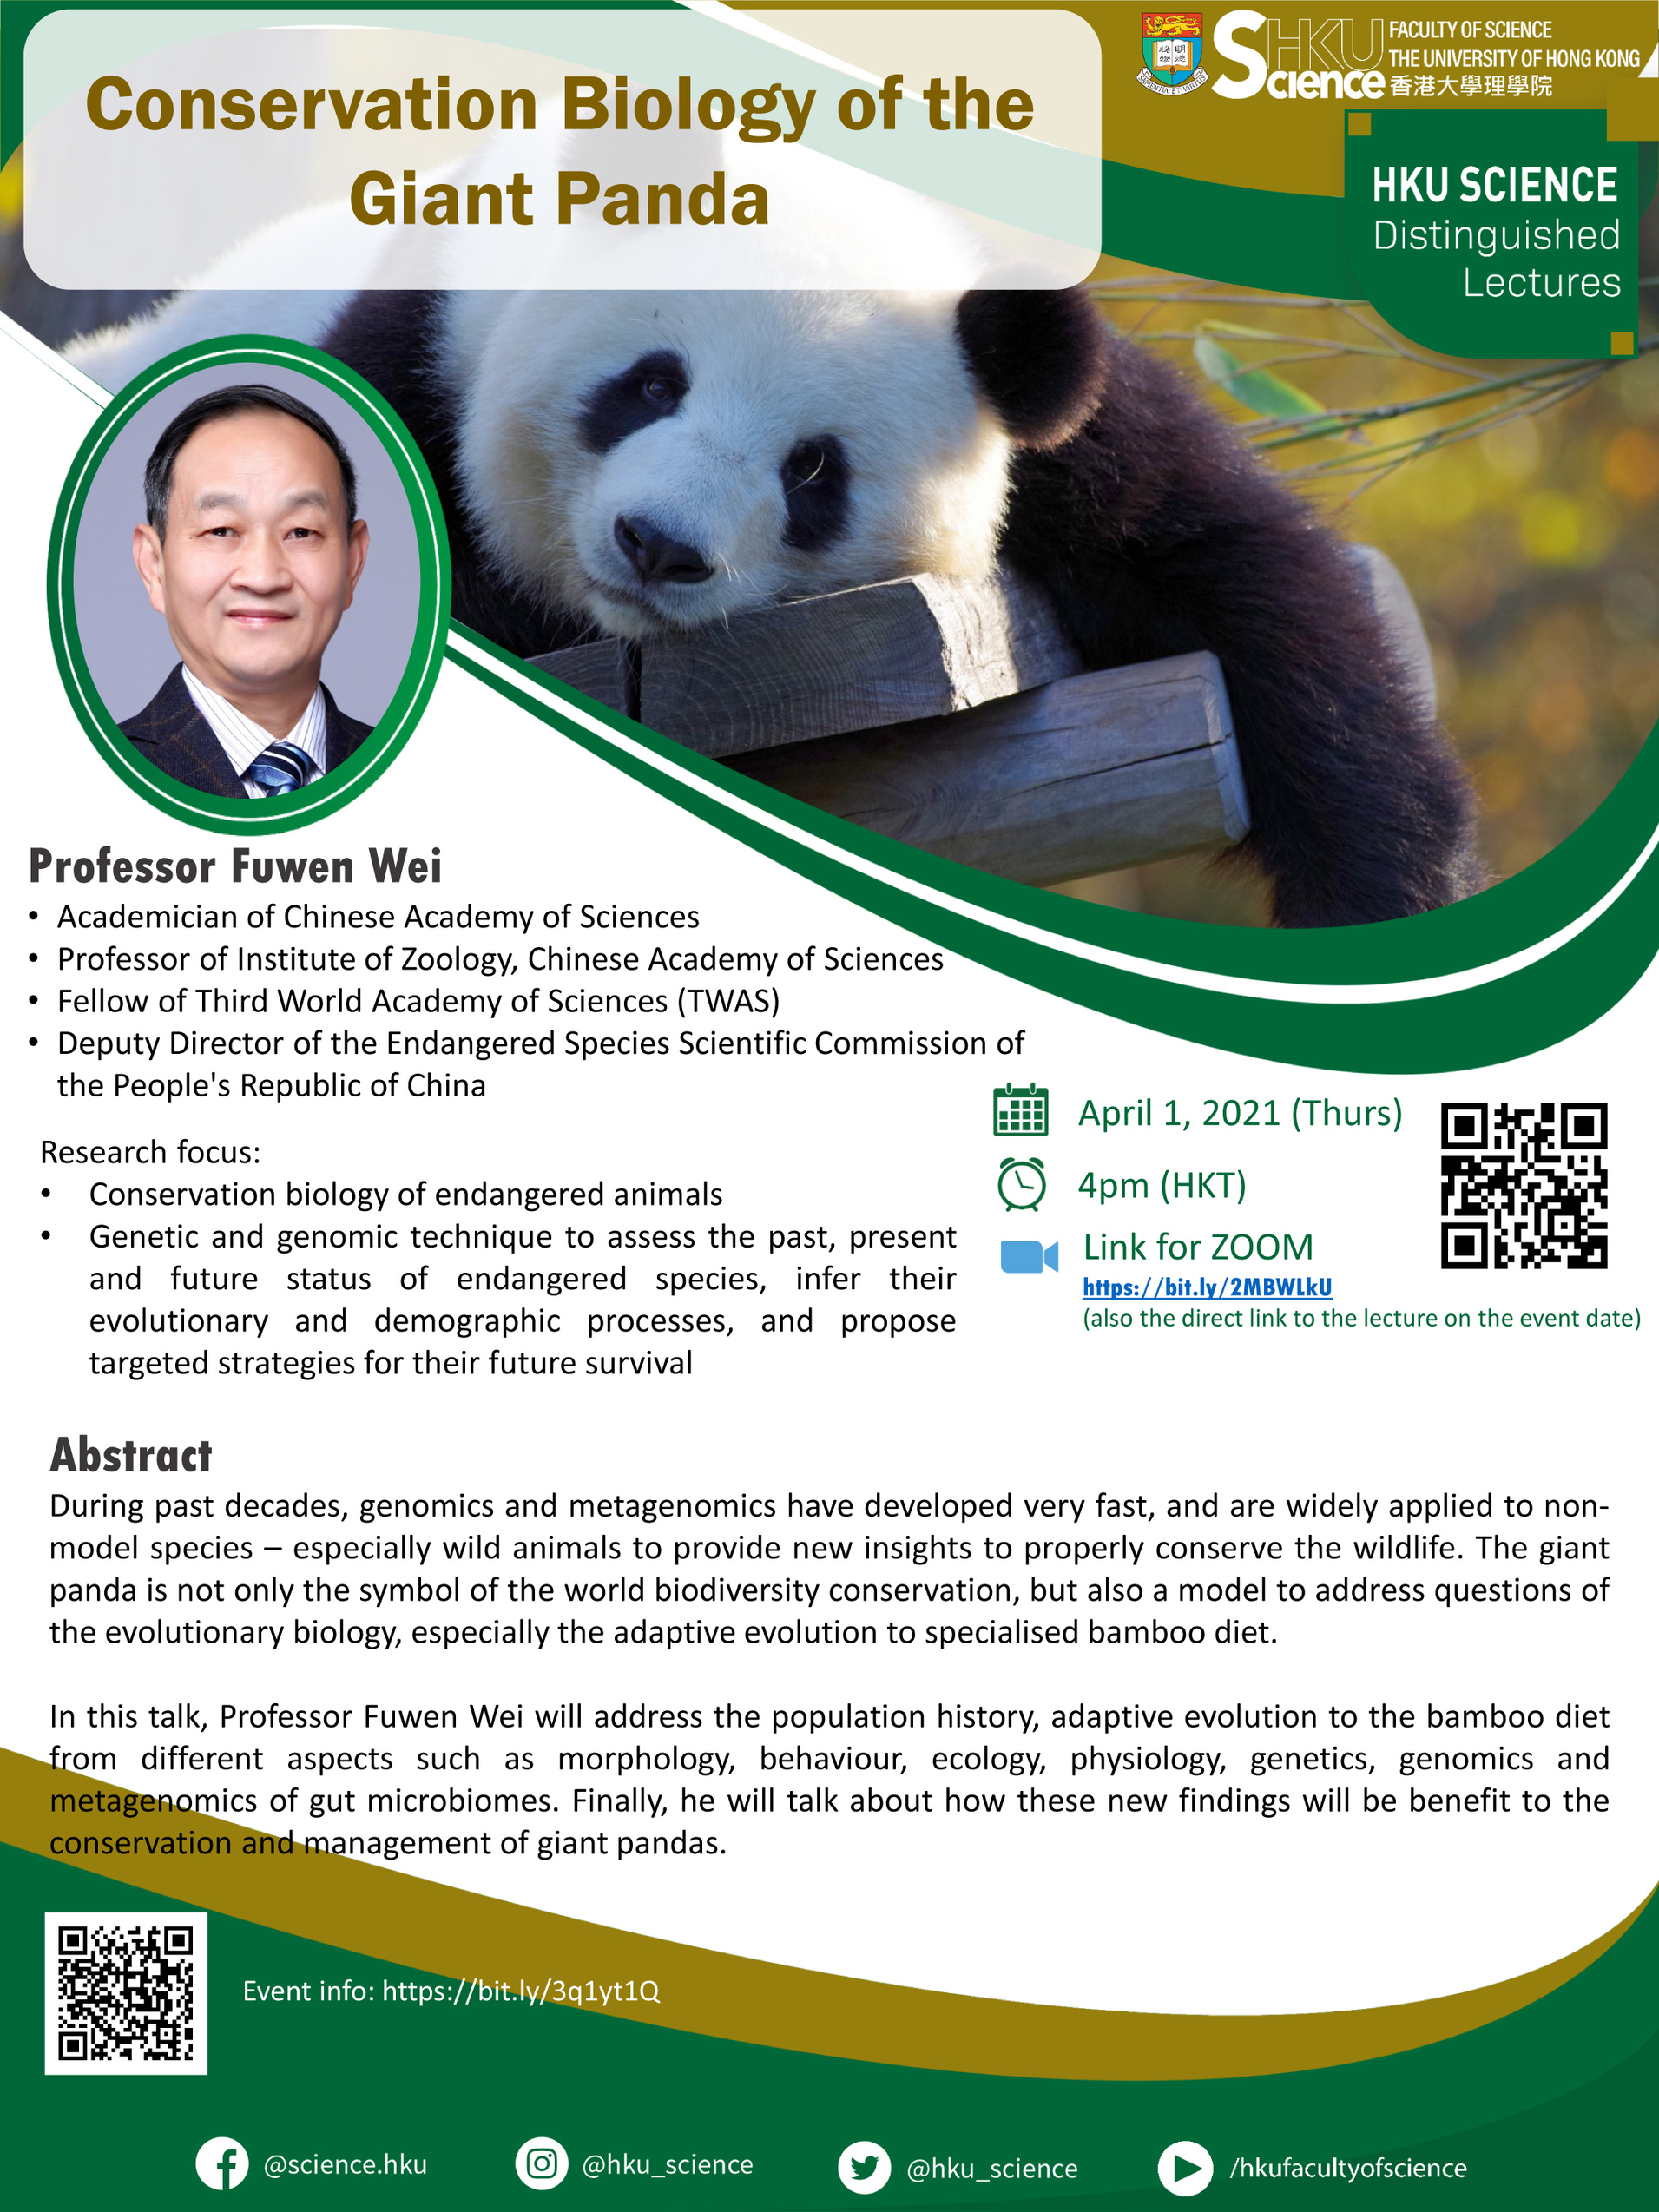 Distinguished Lecture - Conservation Biology of the Giant Panda